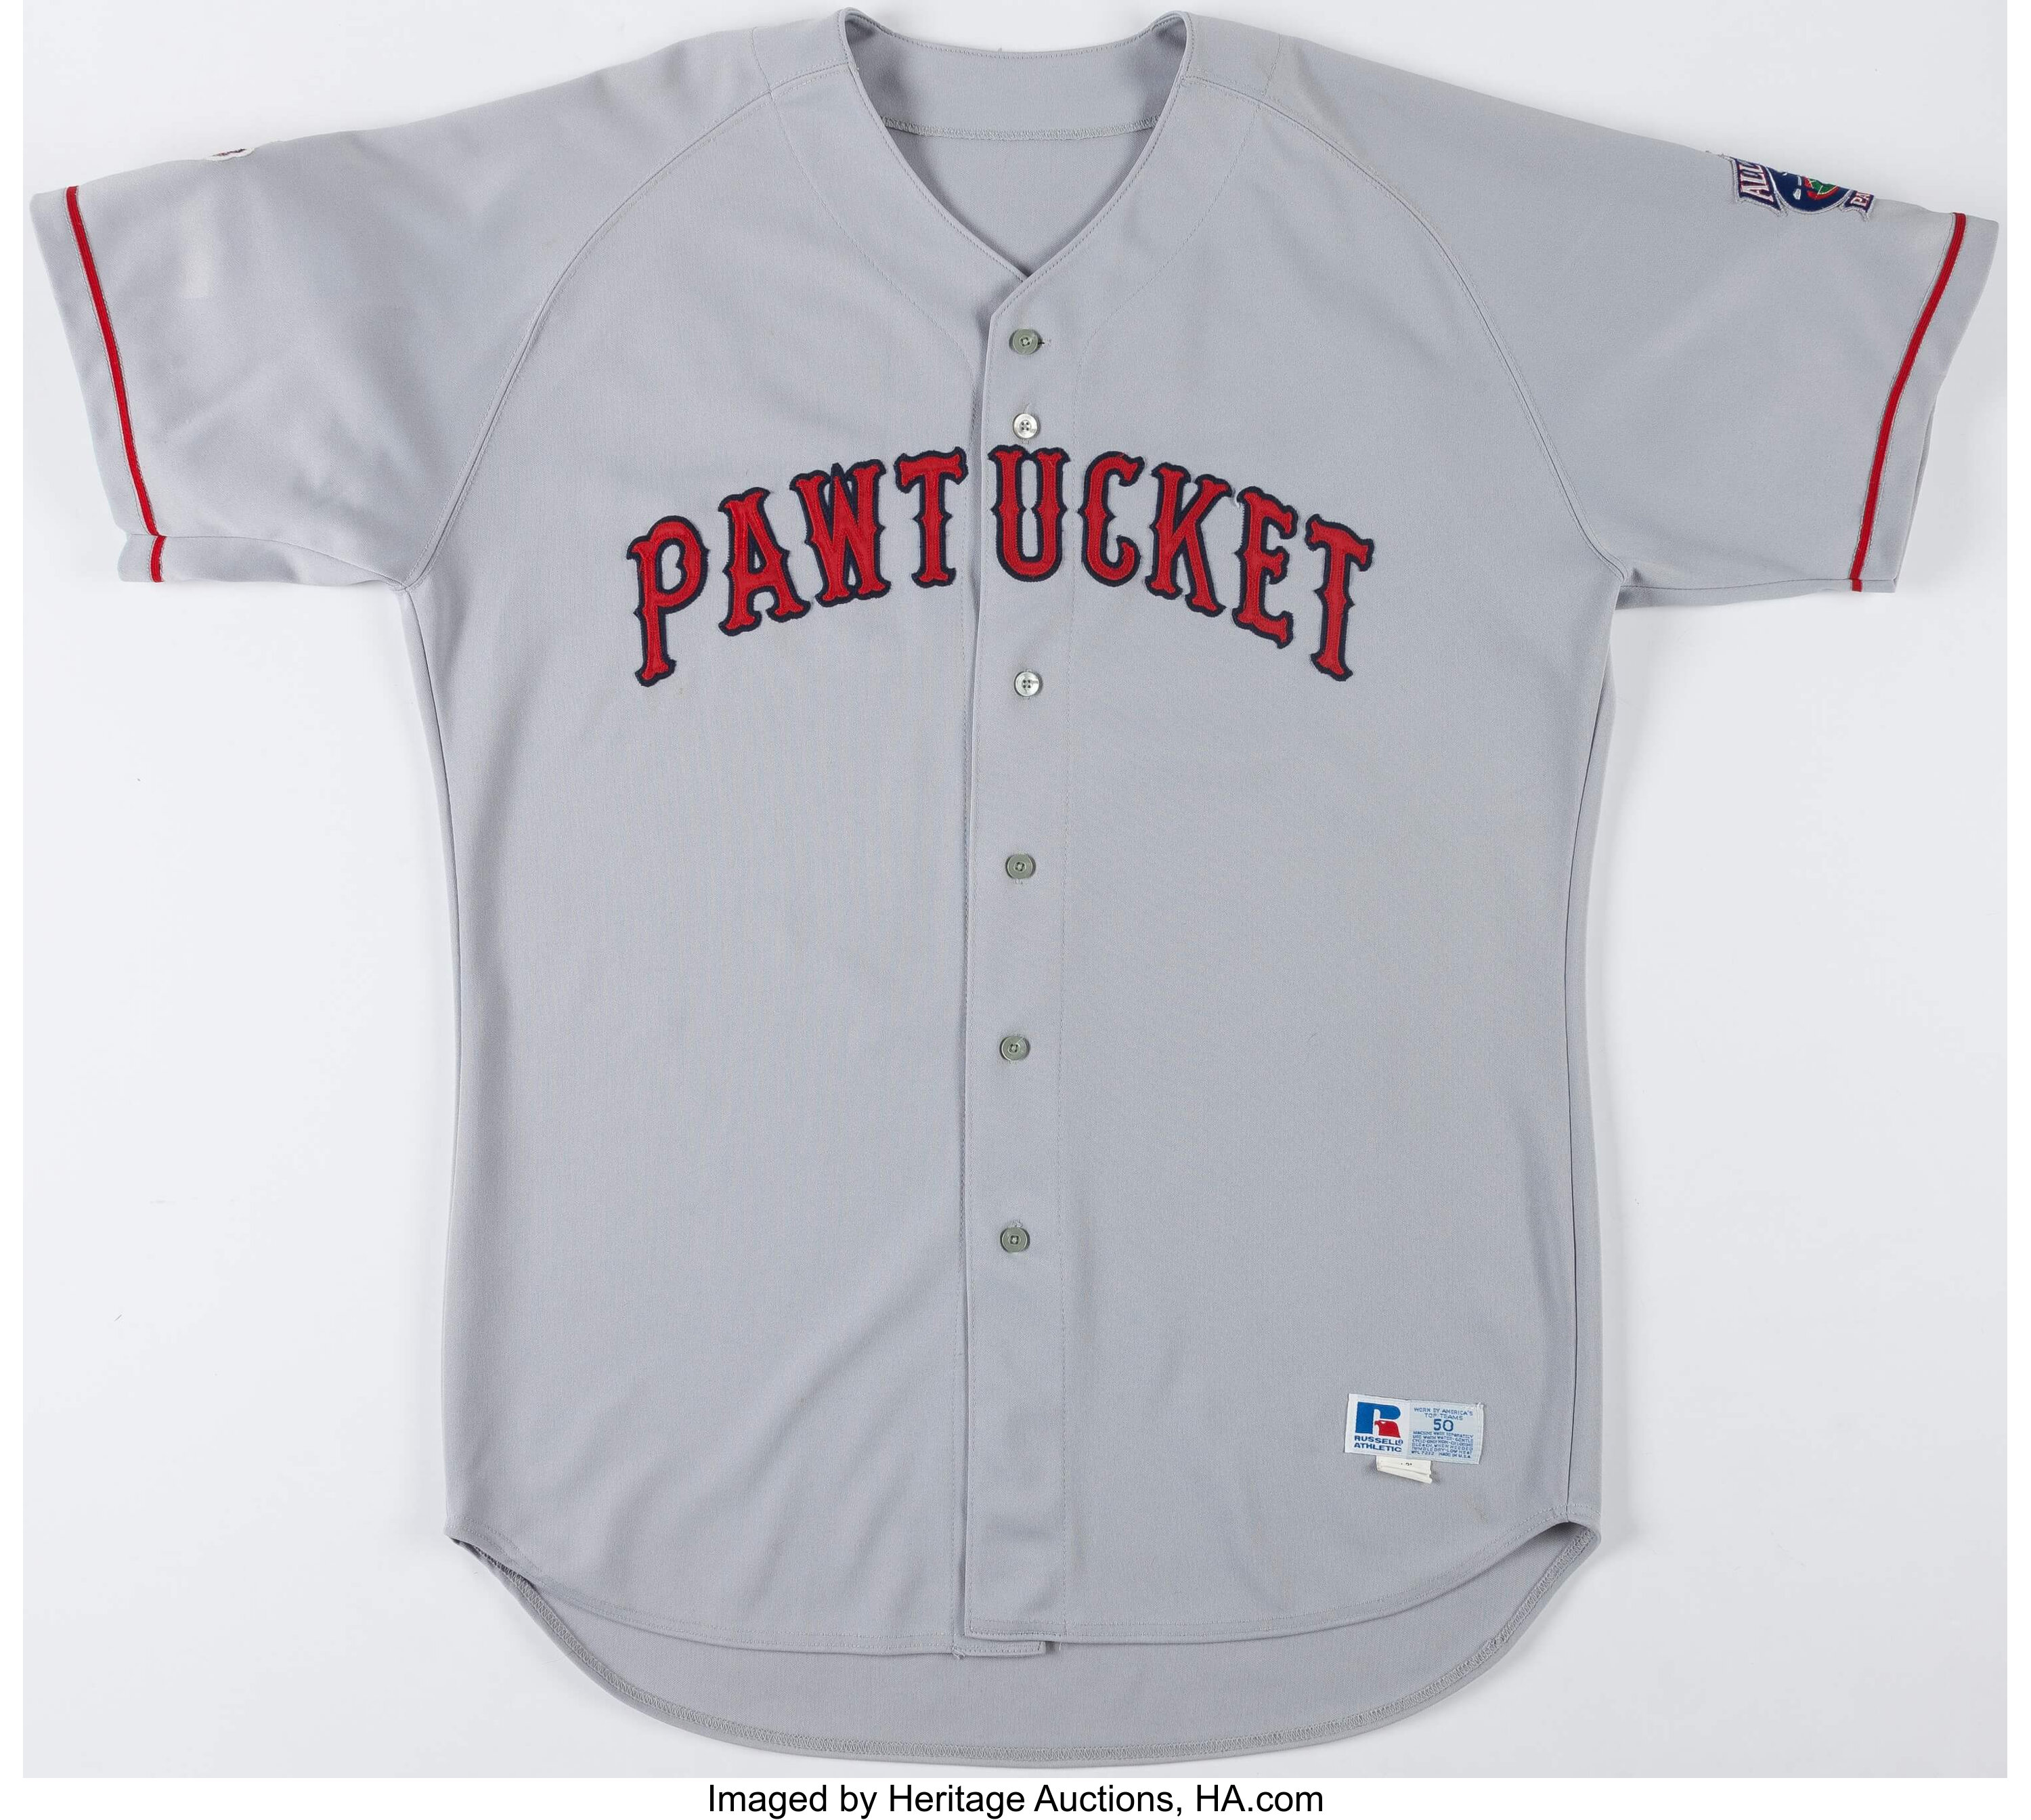 Pawtucket Red Sox PawSox #35 Game Used White Jersey DP08166